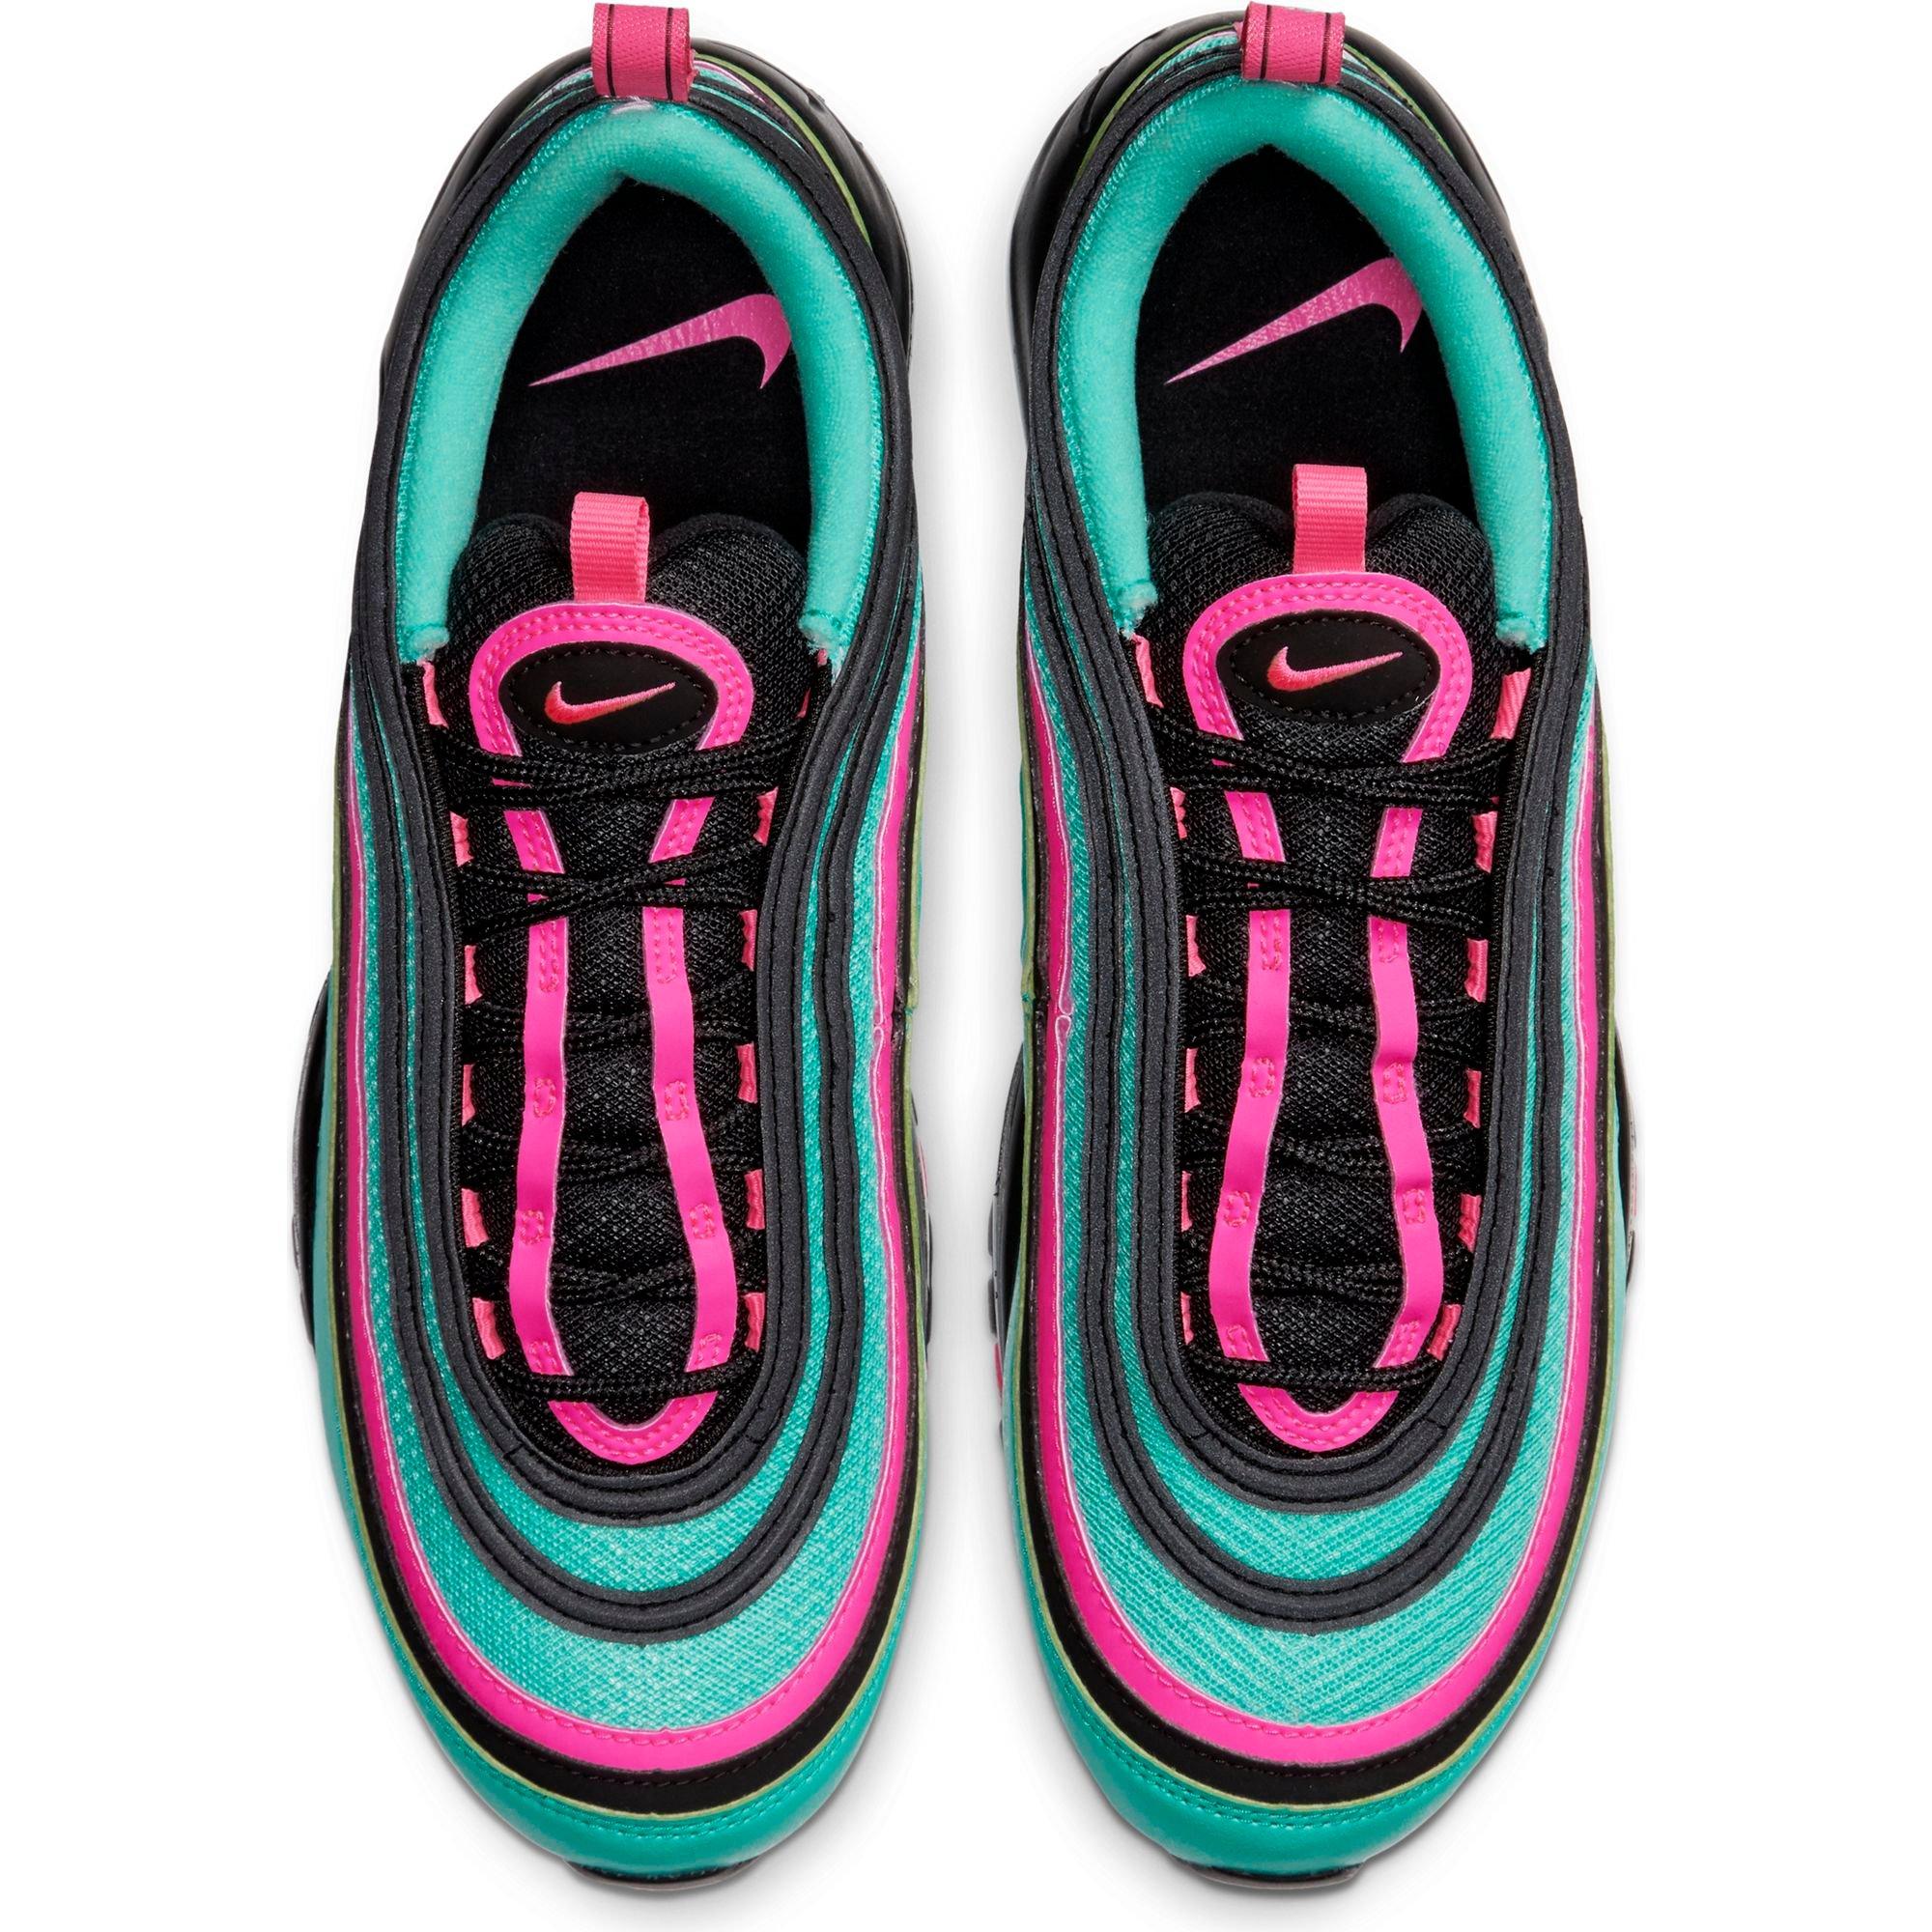 nike air max 97 turquoise and pink